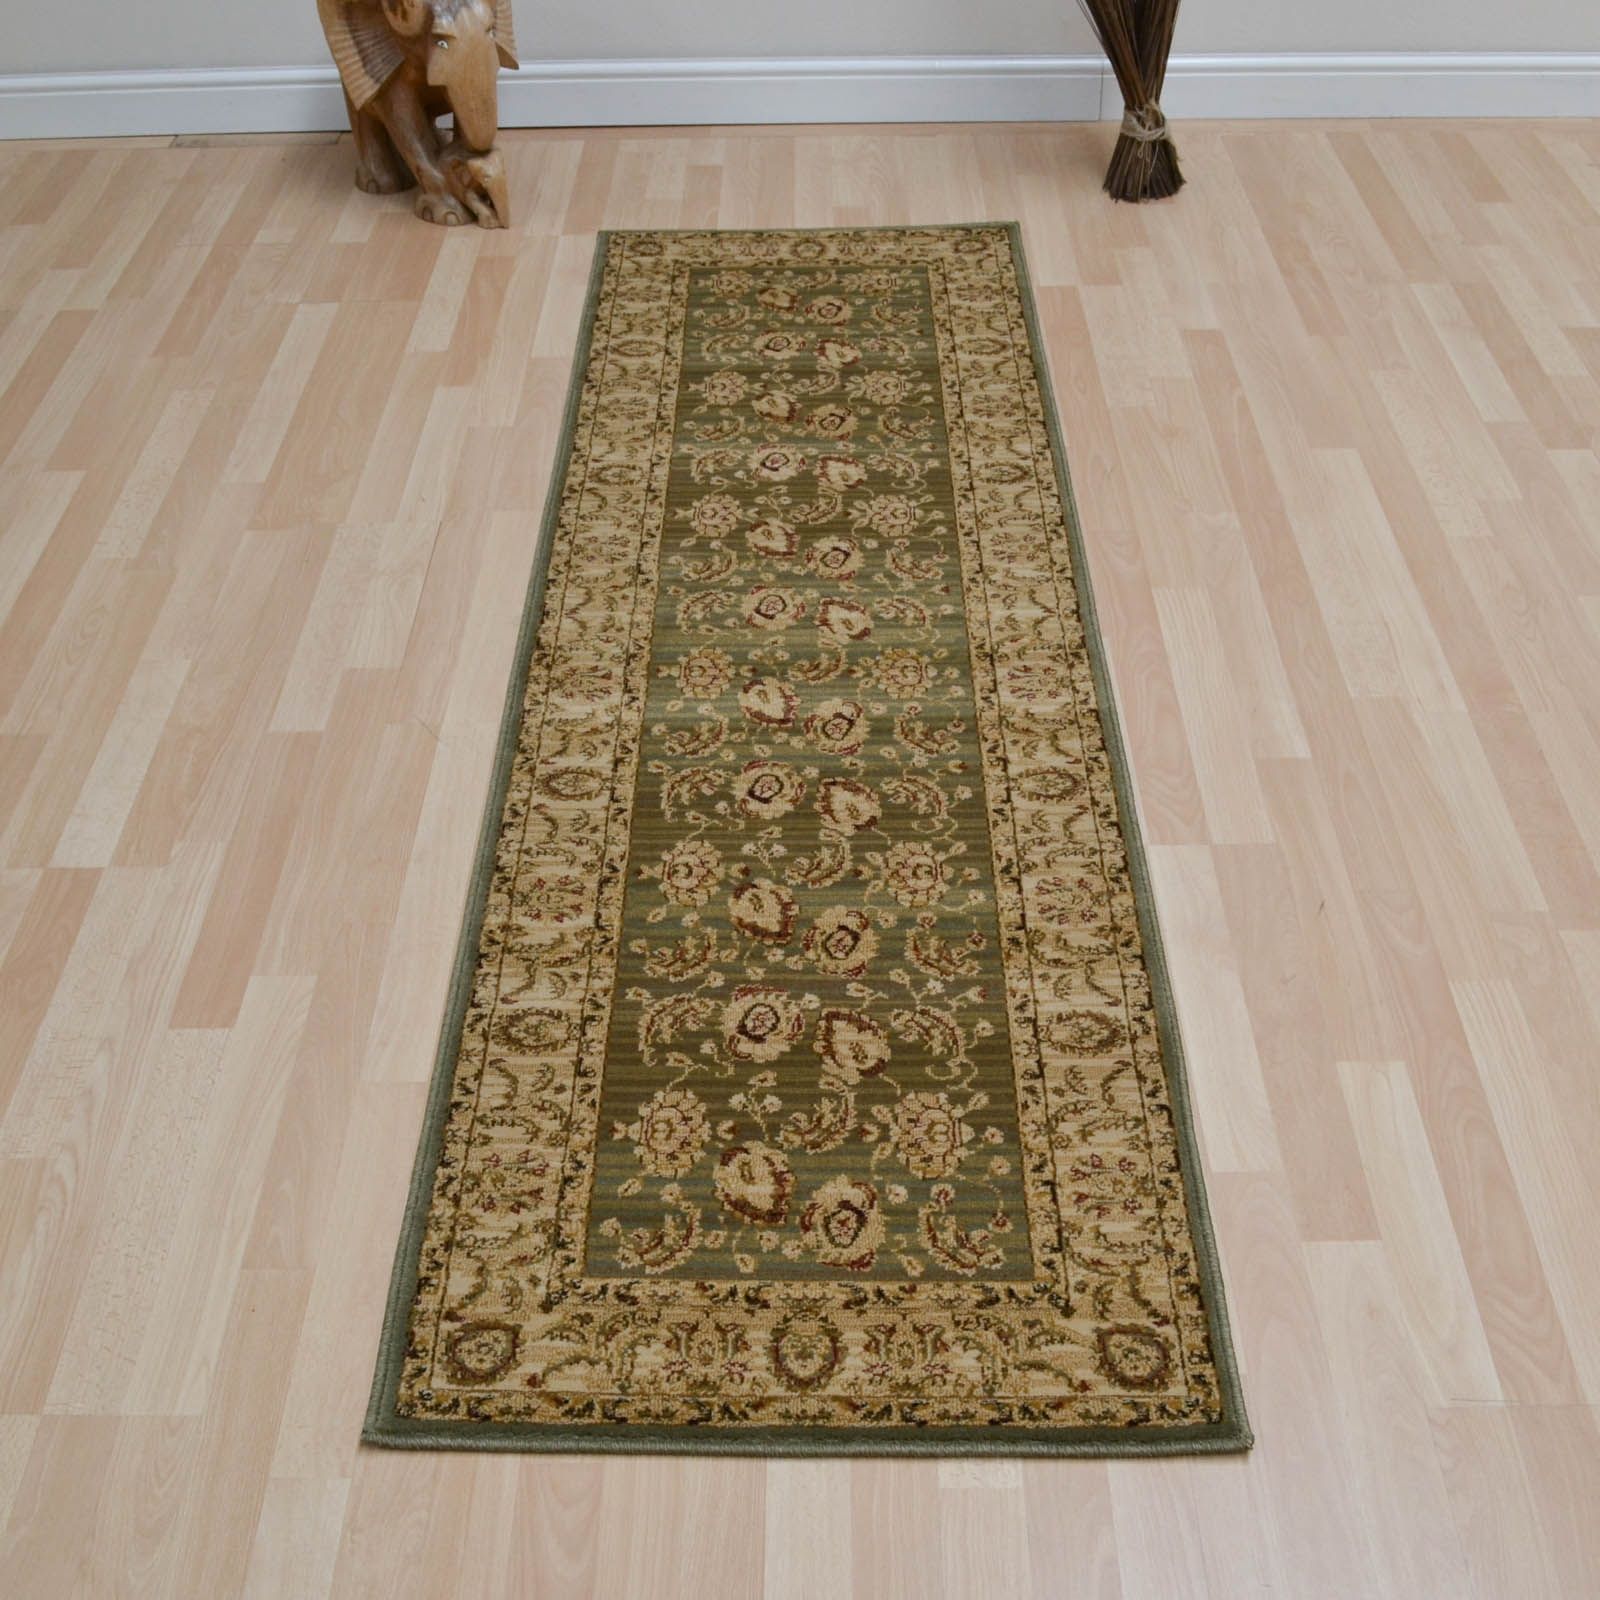 Garous Hallway Runners In Green Free Uk Delivery The Rug Seller Intended For Hallway Runners Green (View 4 of 20)